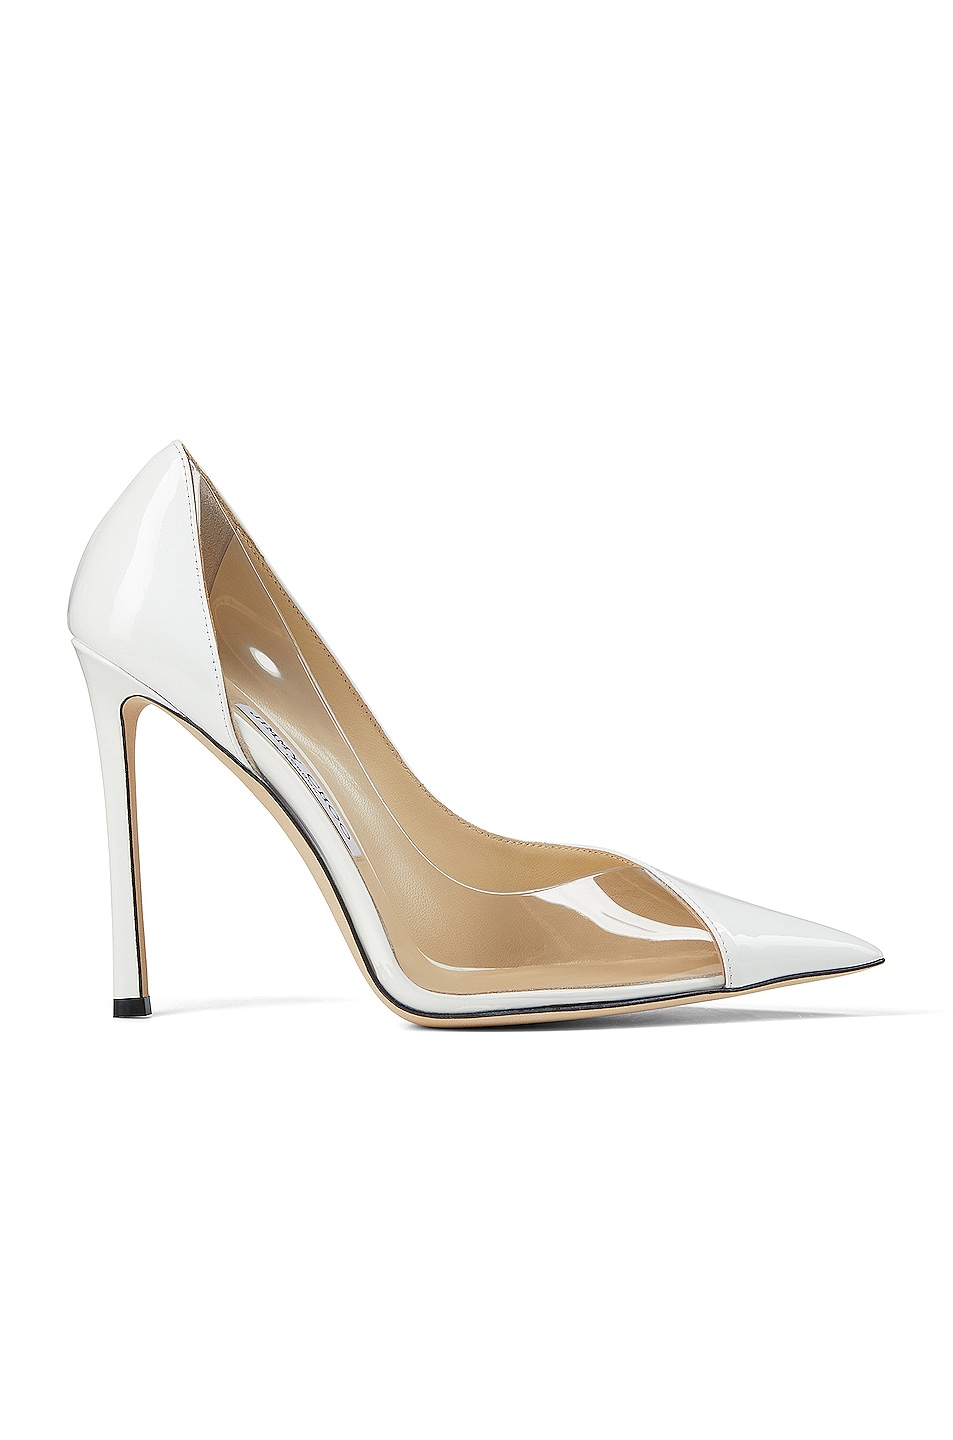 Image 1 of Jimmy Choo Cass 110 Patent & Plexi Heel in Optical White & Clear